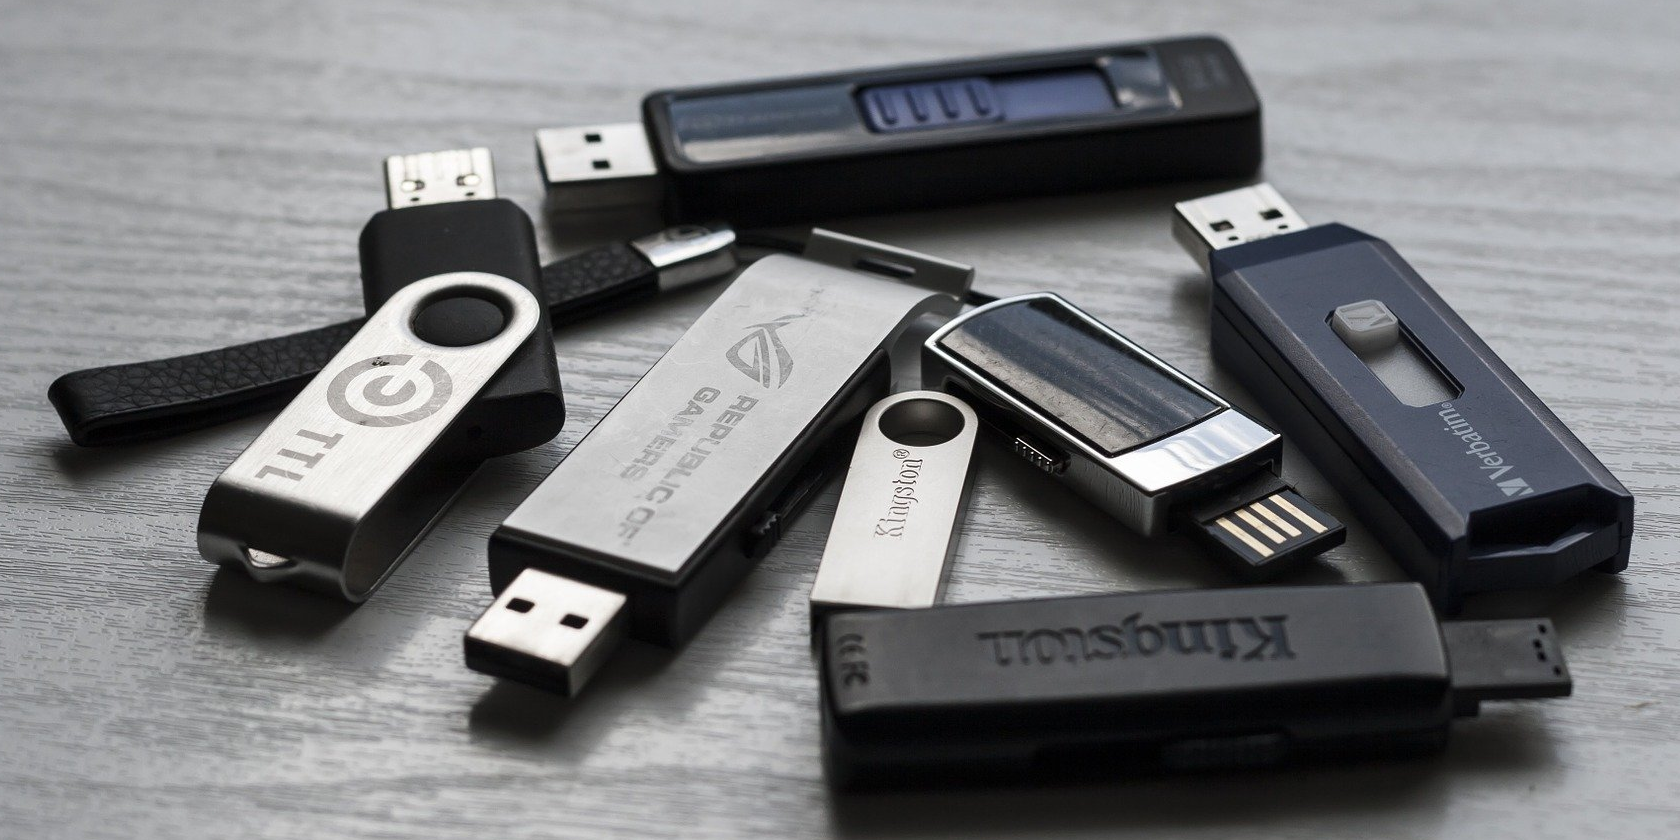 The 7 3.0 Flash Drives